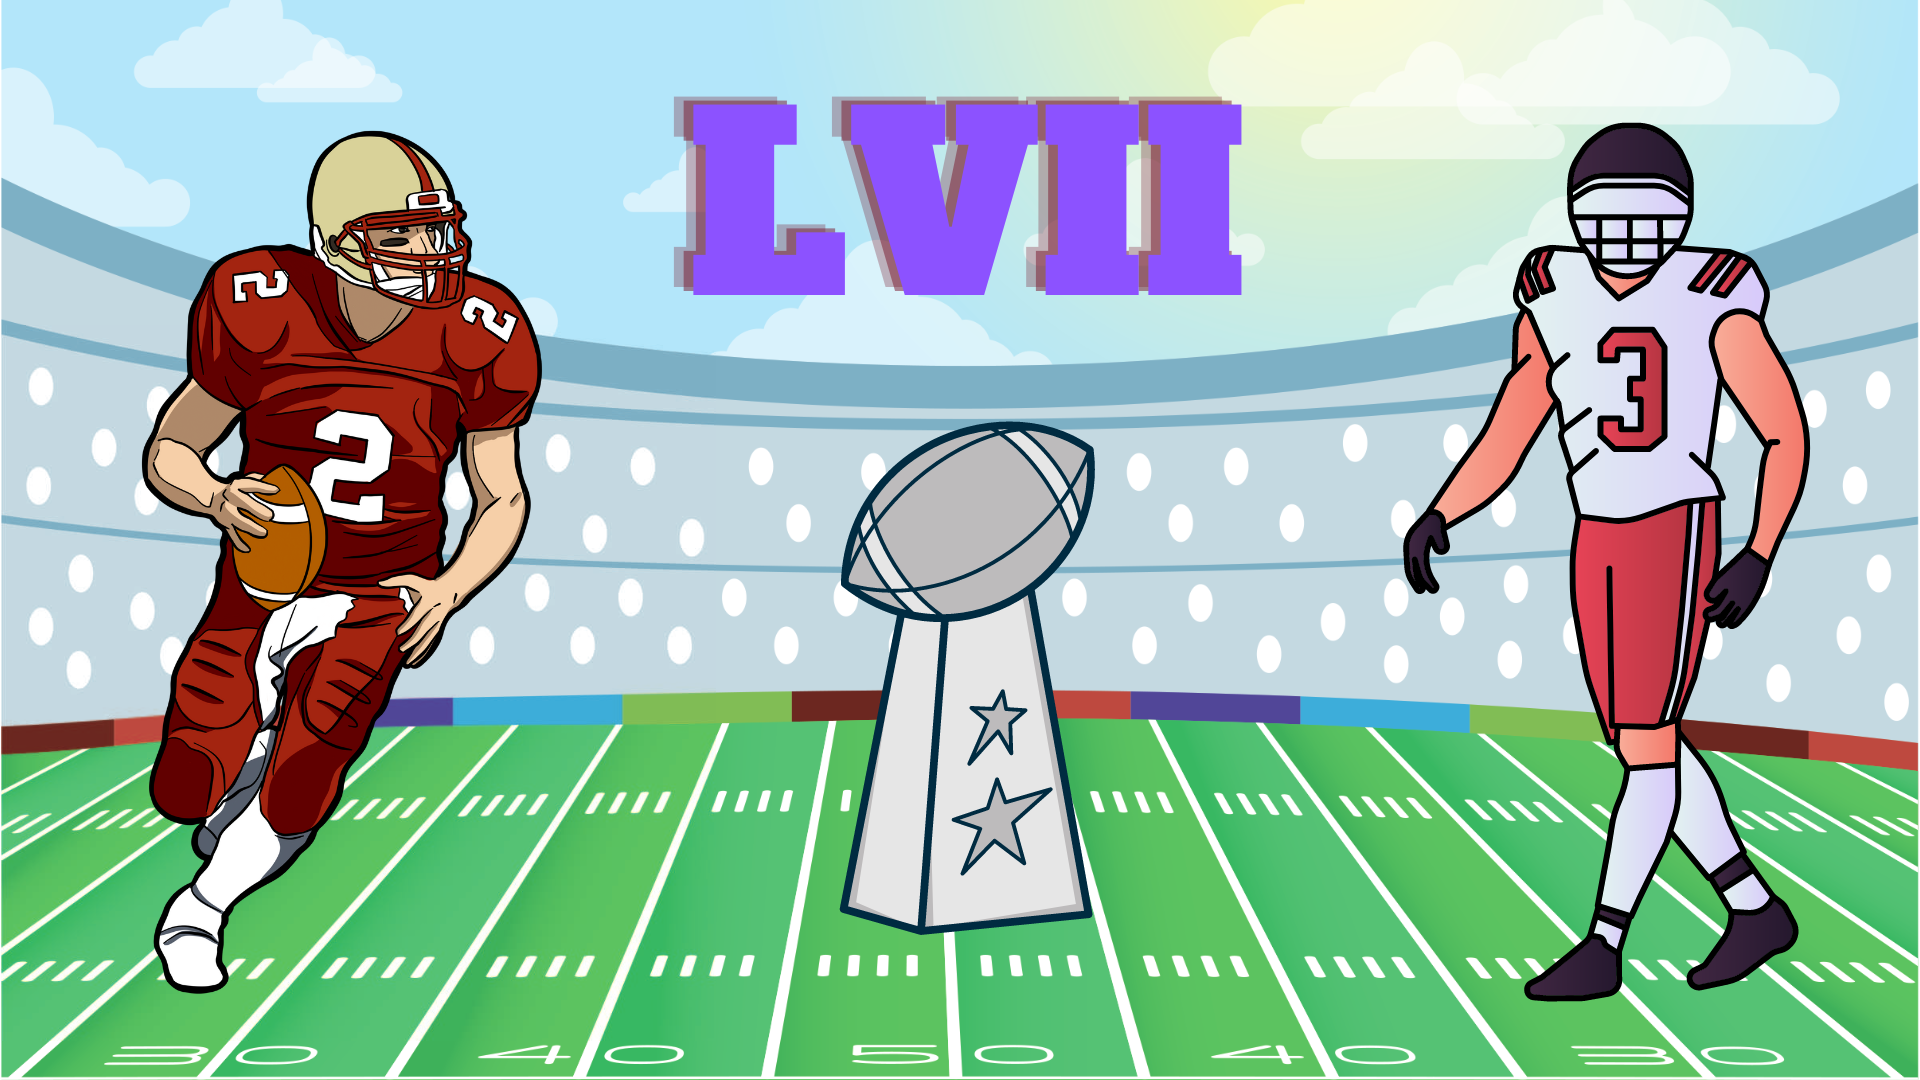 The Super Bowl LVIII takes place on Feb 11, this Sunday. Get ready to tune in!!